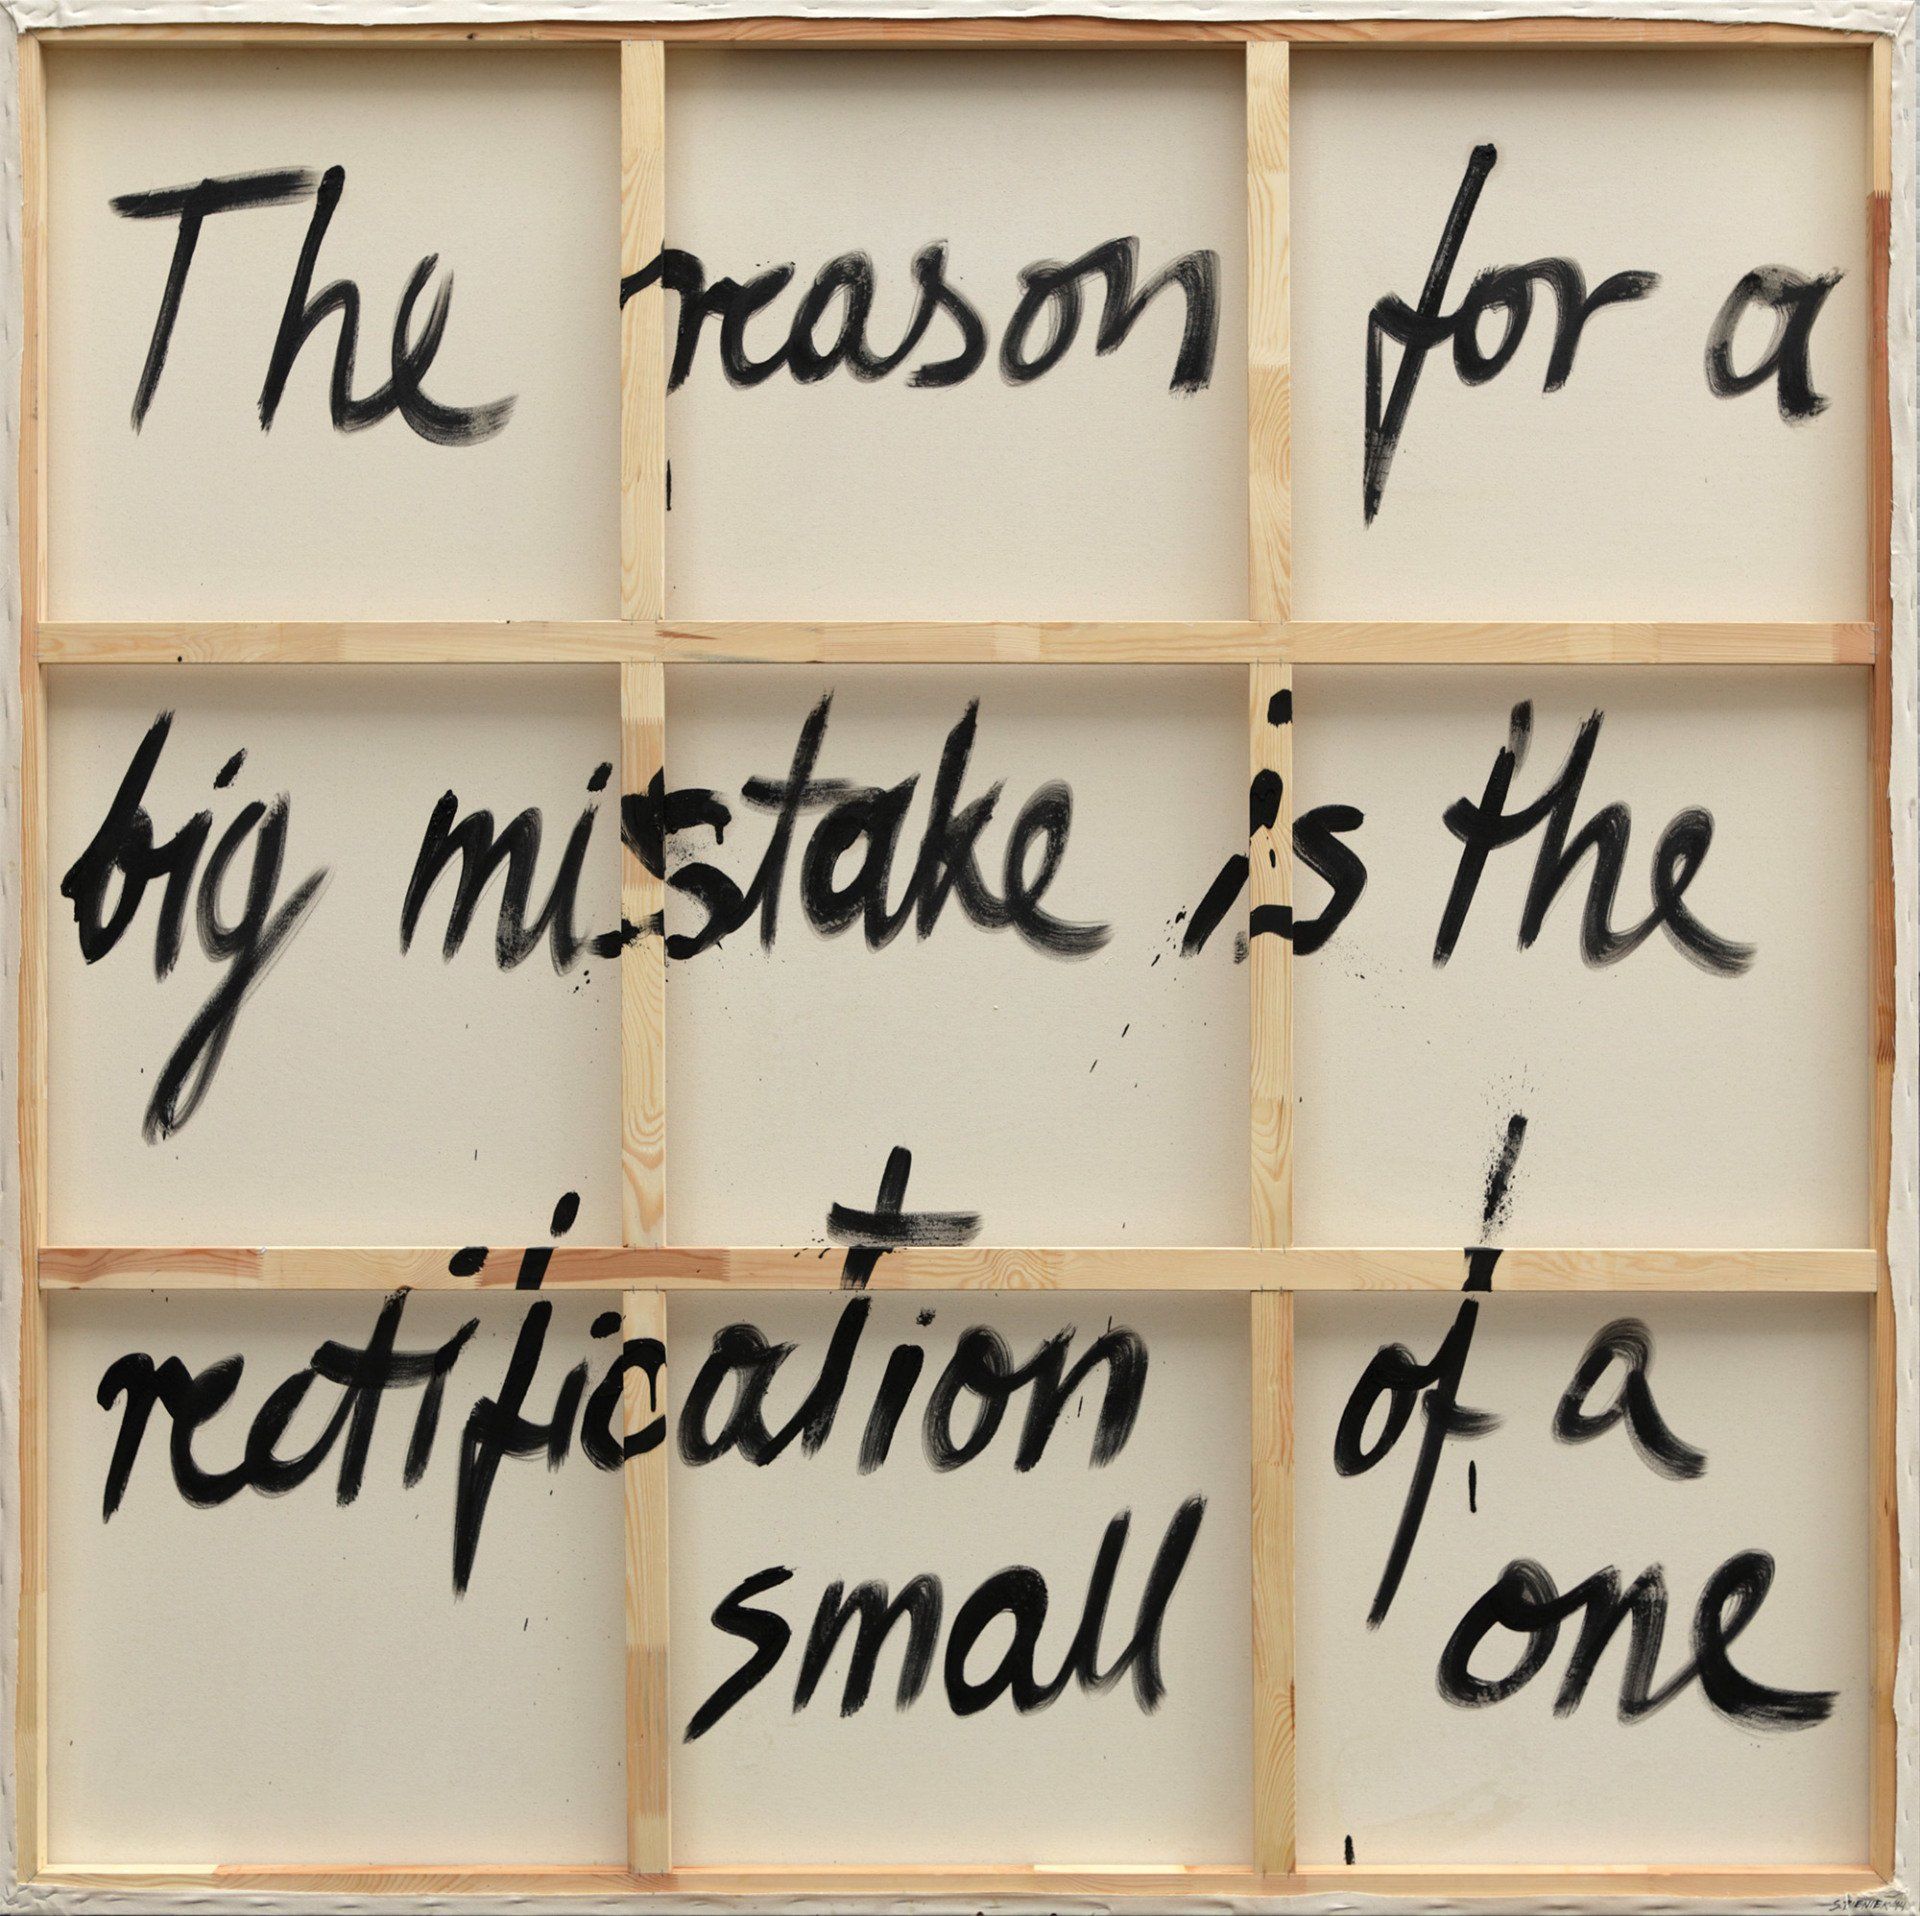 „The reason for a big mistake is the rectification of a small one“ by Sebastian Bieniek (B1EN1EK), 2014. Oil on back of canvas. 200 cm. x  200 cm. From the oeuvre of Bieniek-Text and part of the 